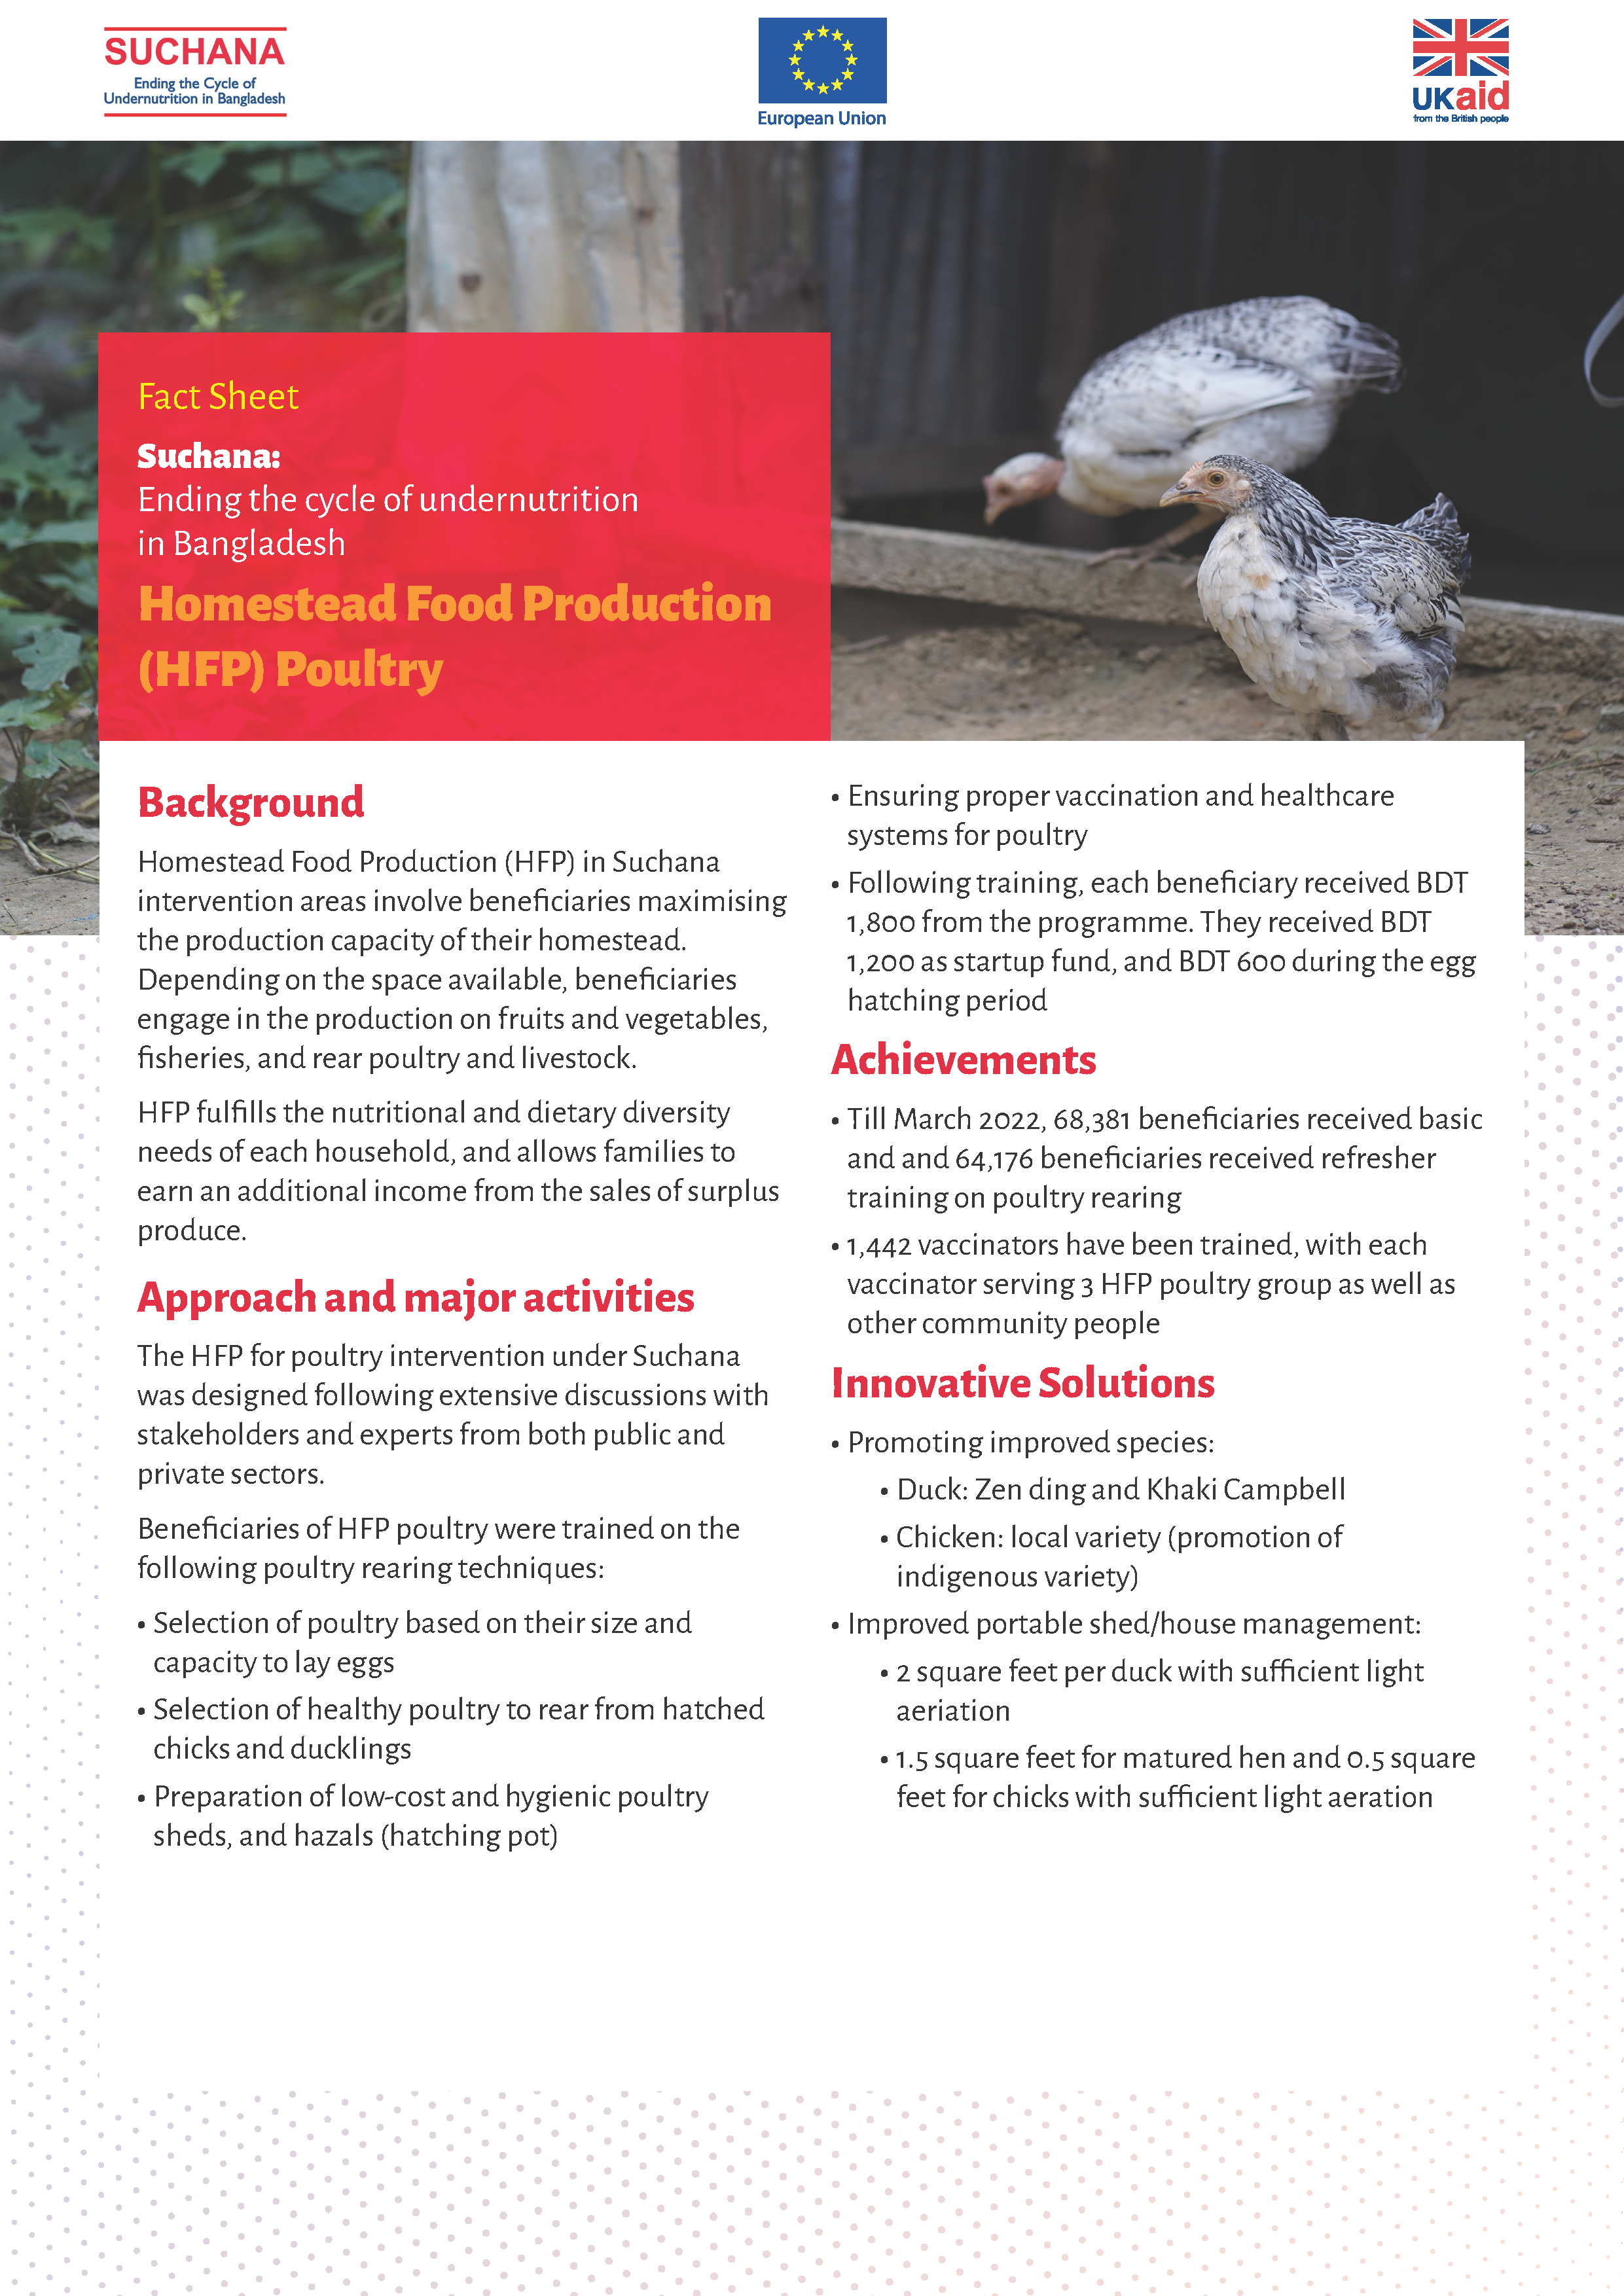 Cover page for Suchana's Approach to Household Food Production – Poultry